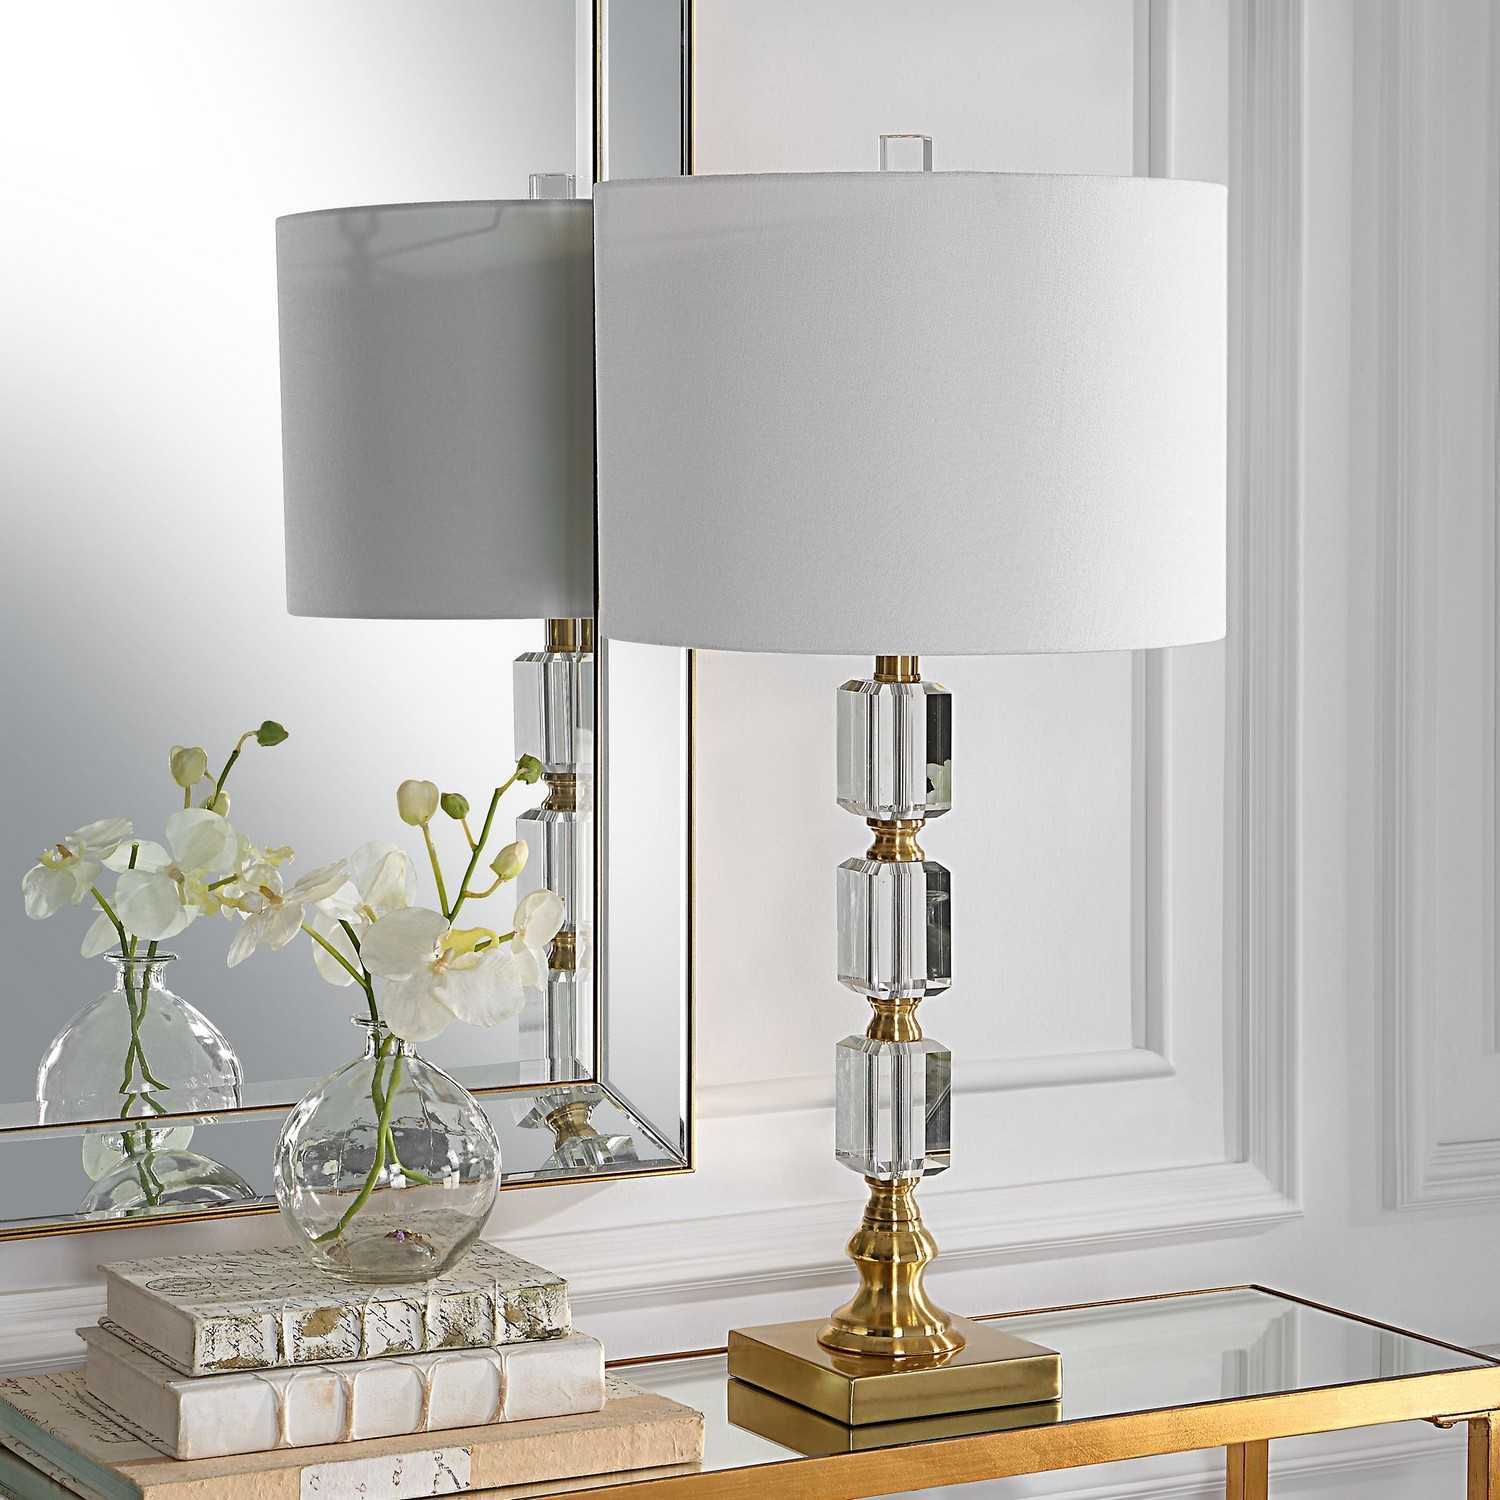 ABC Accent ABC-26094-1 Table Lamp - Brass